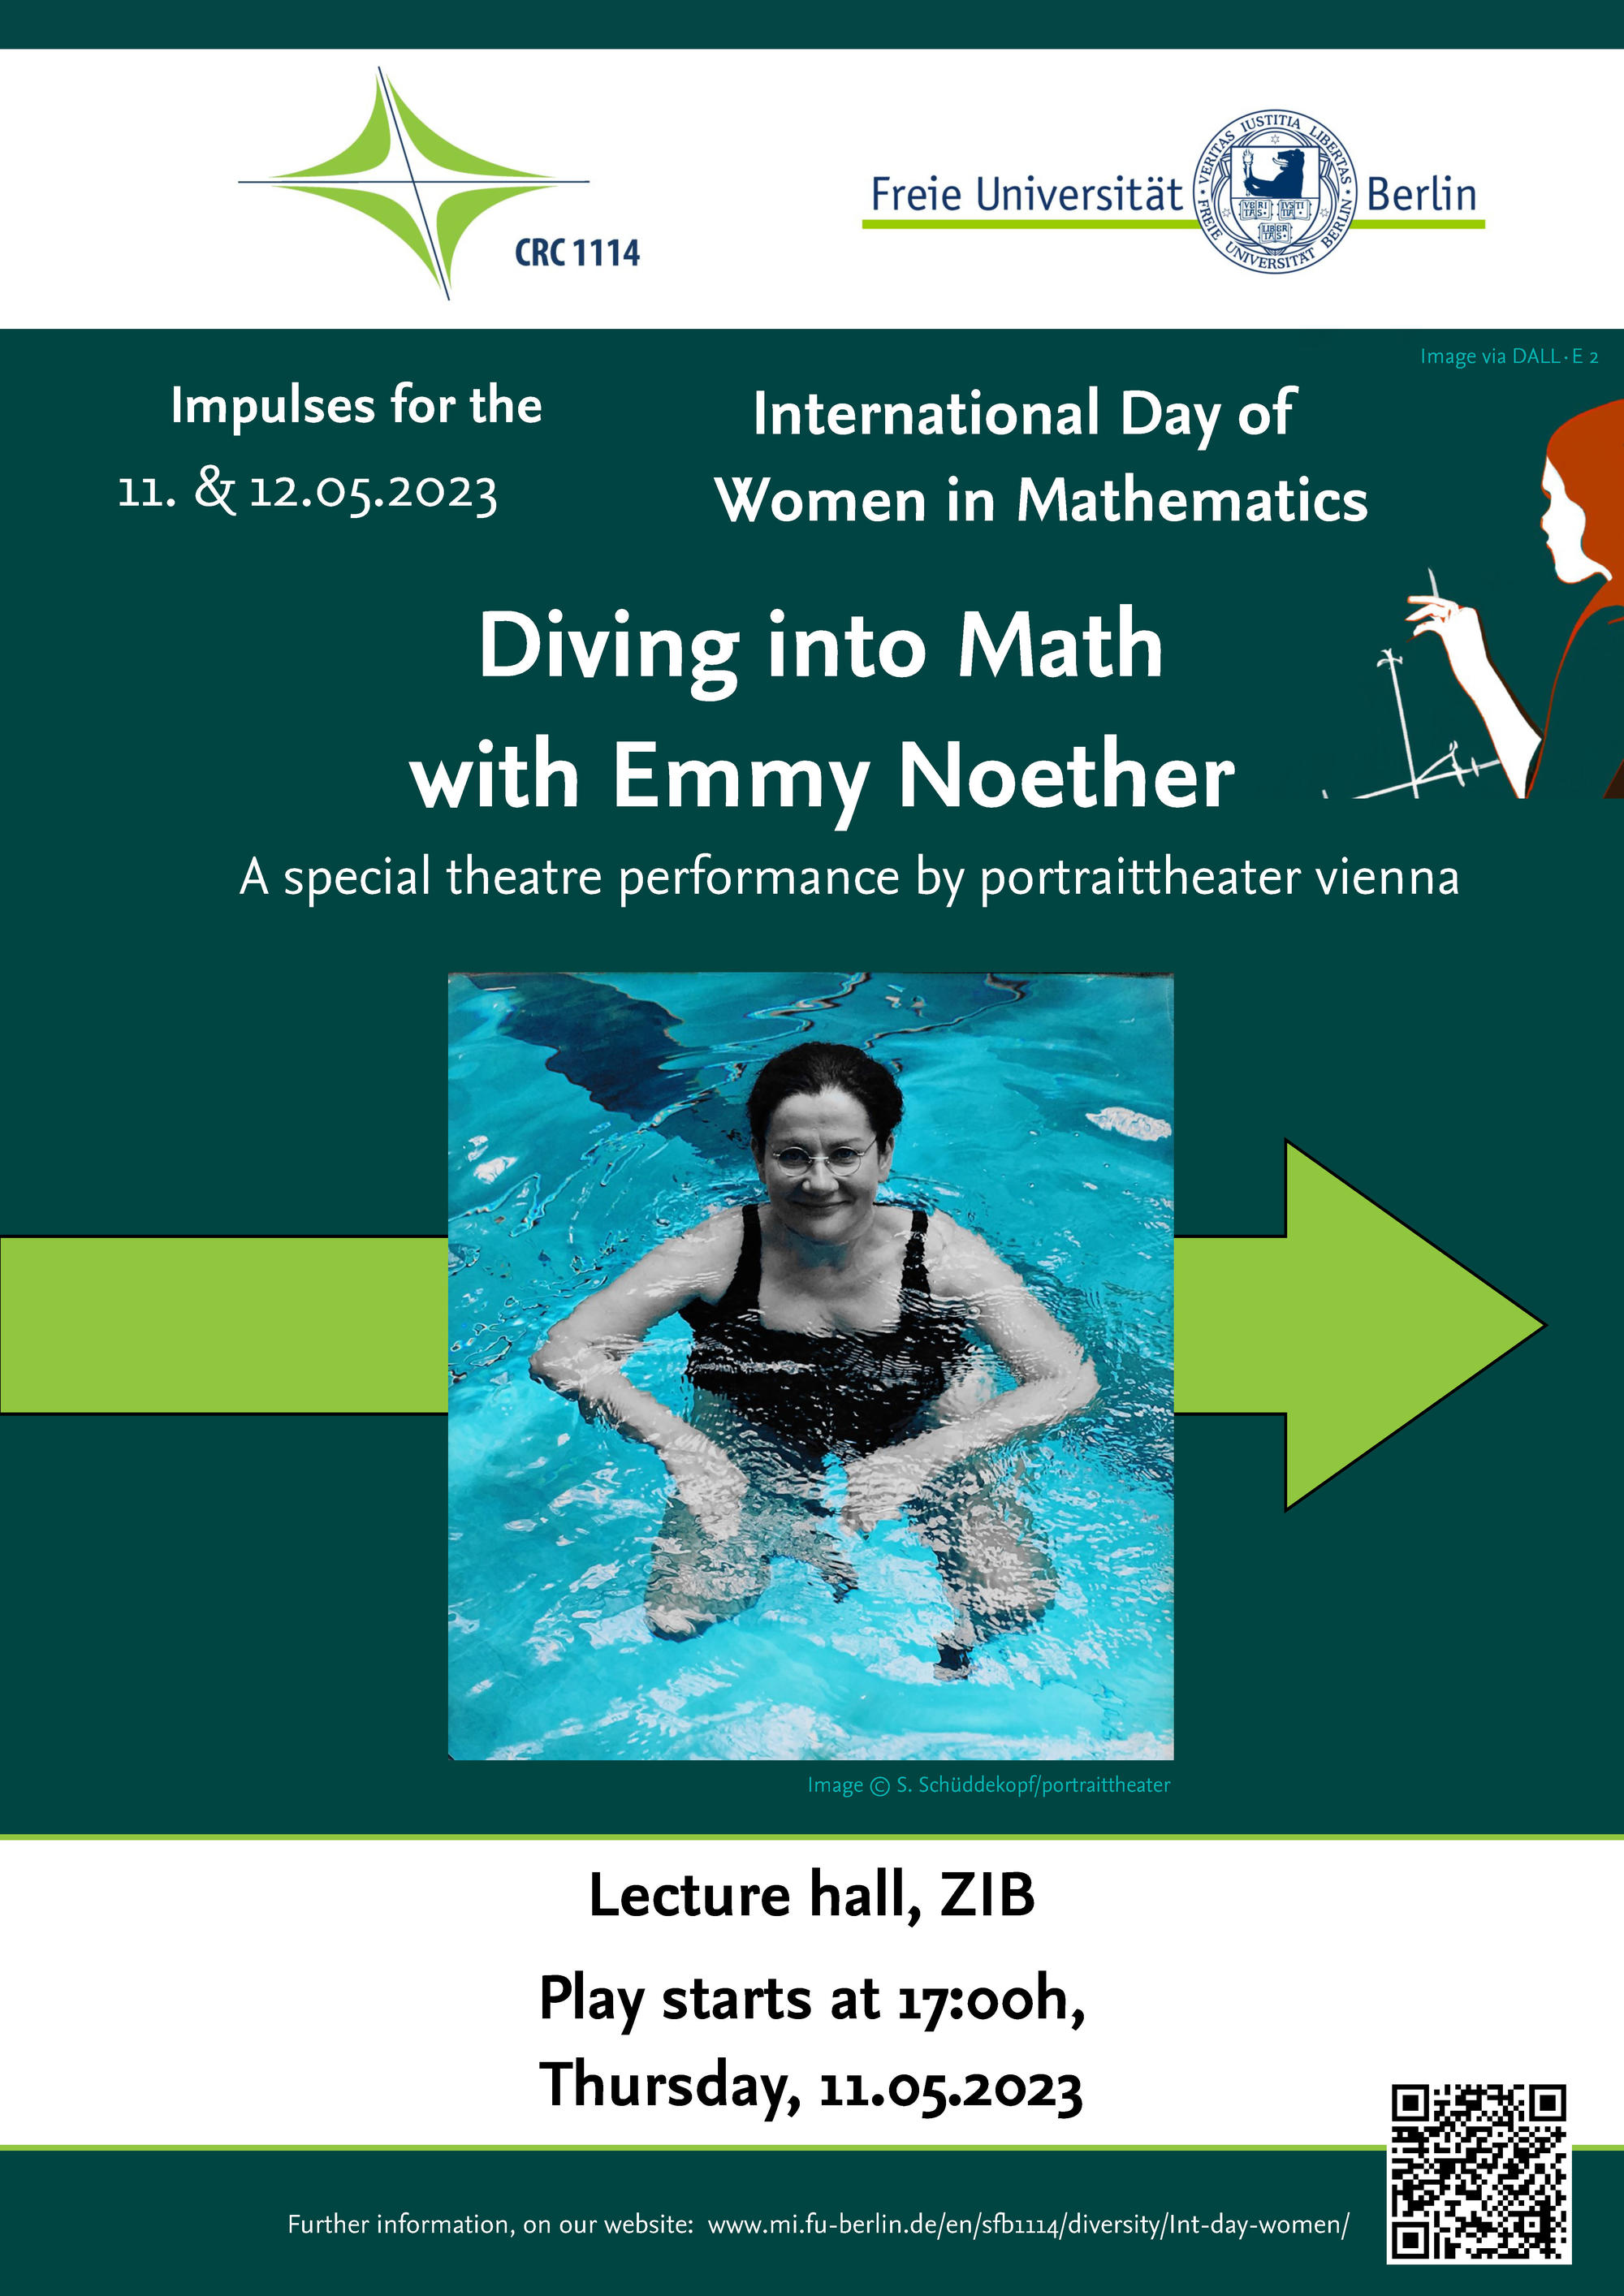 Diving into Math with Emmy Noether